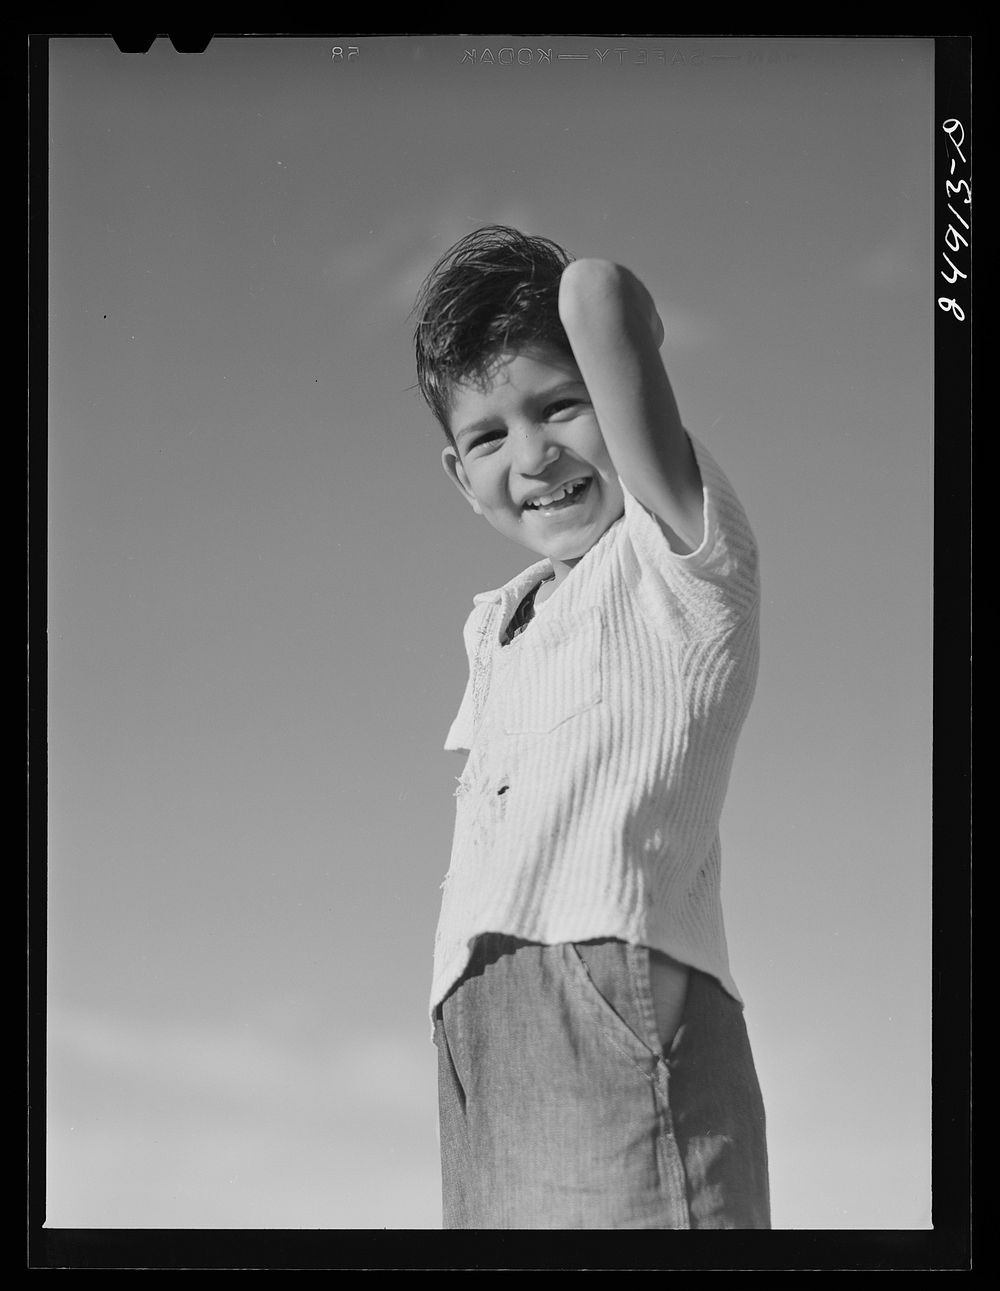 [Untitled photo, possibly related to: Migratory worker's child. Robstown FSA (Farm Security Administration) camp, Texas].…